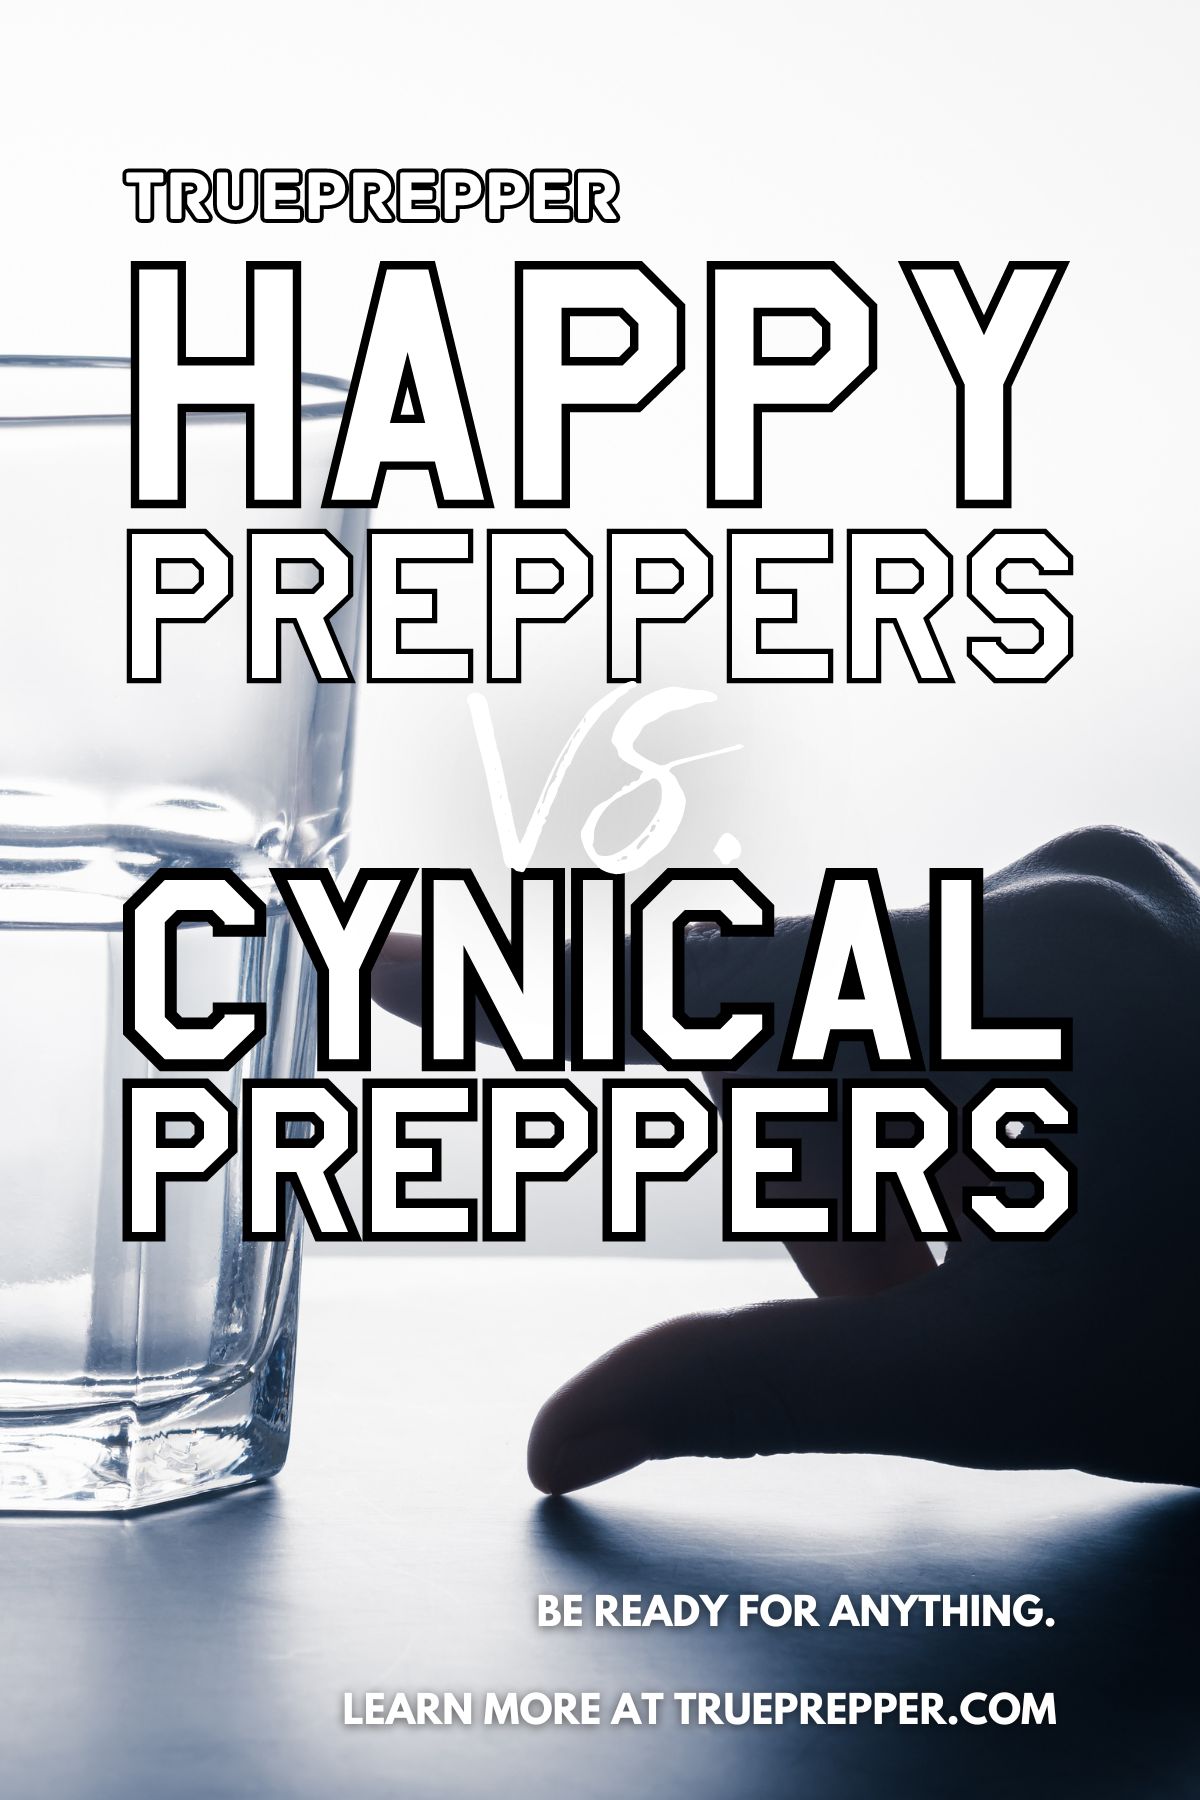 Happy Preppers vs Cynical Preppers